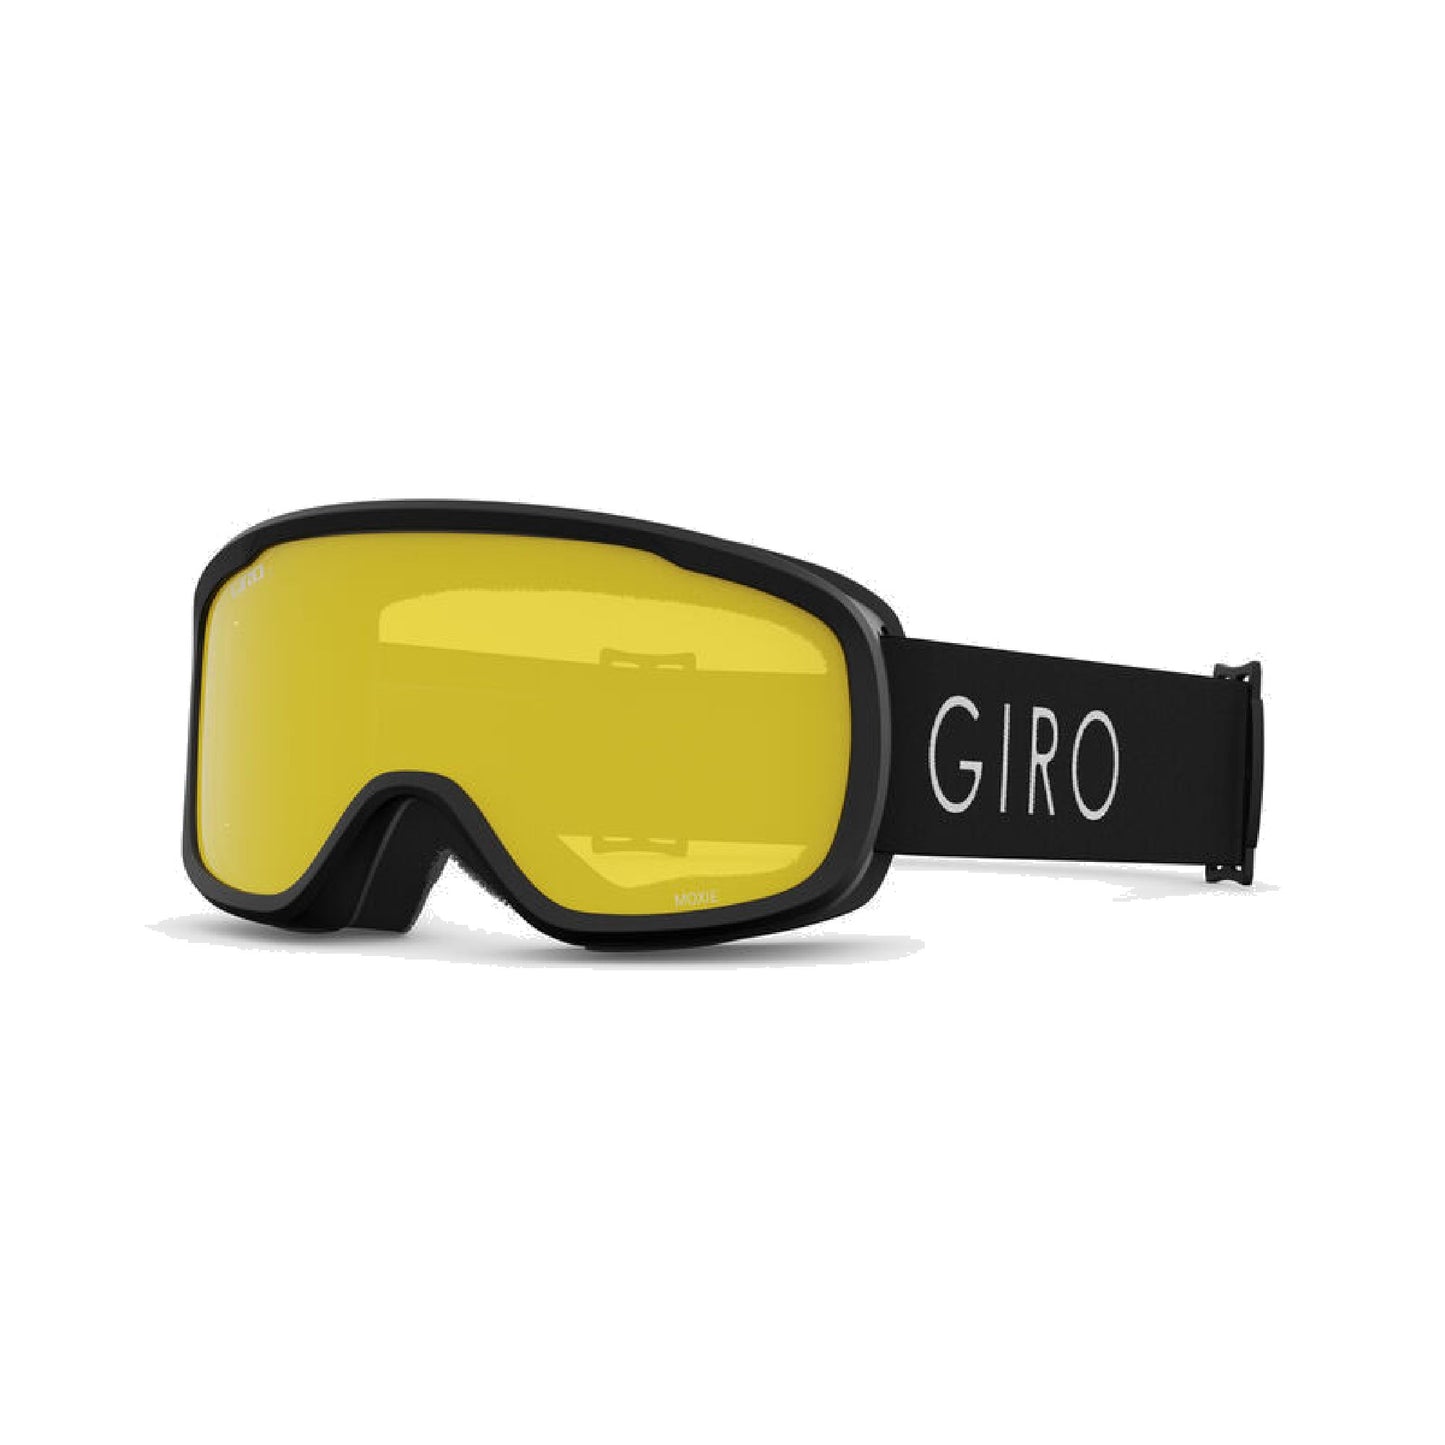 Giro Women's Moxie AF Snow Goggles Black Core Light Amber Gold Snow Goggles